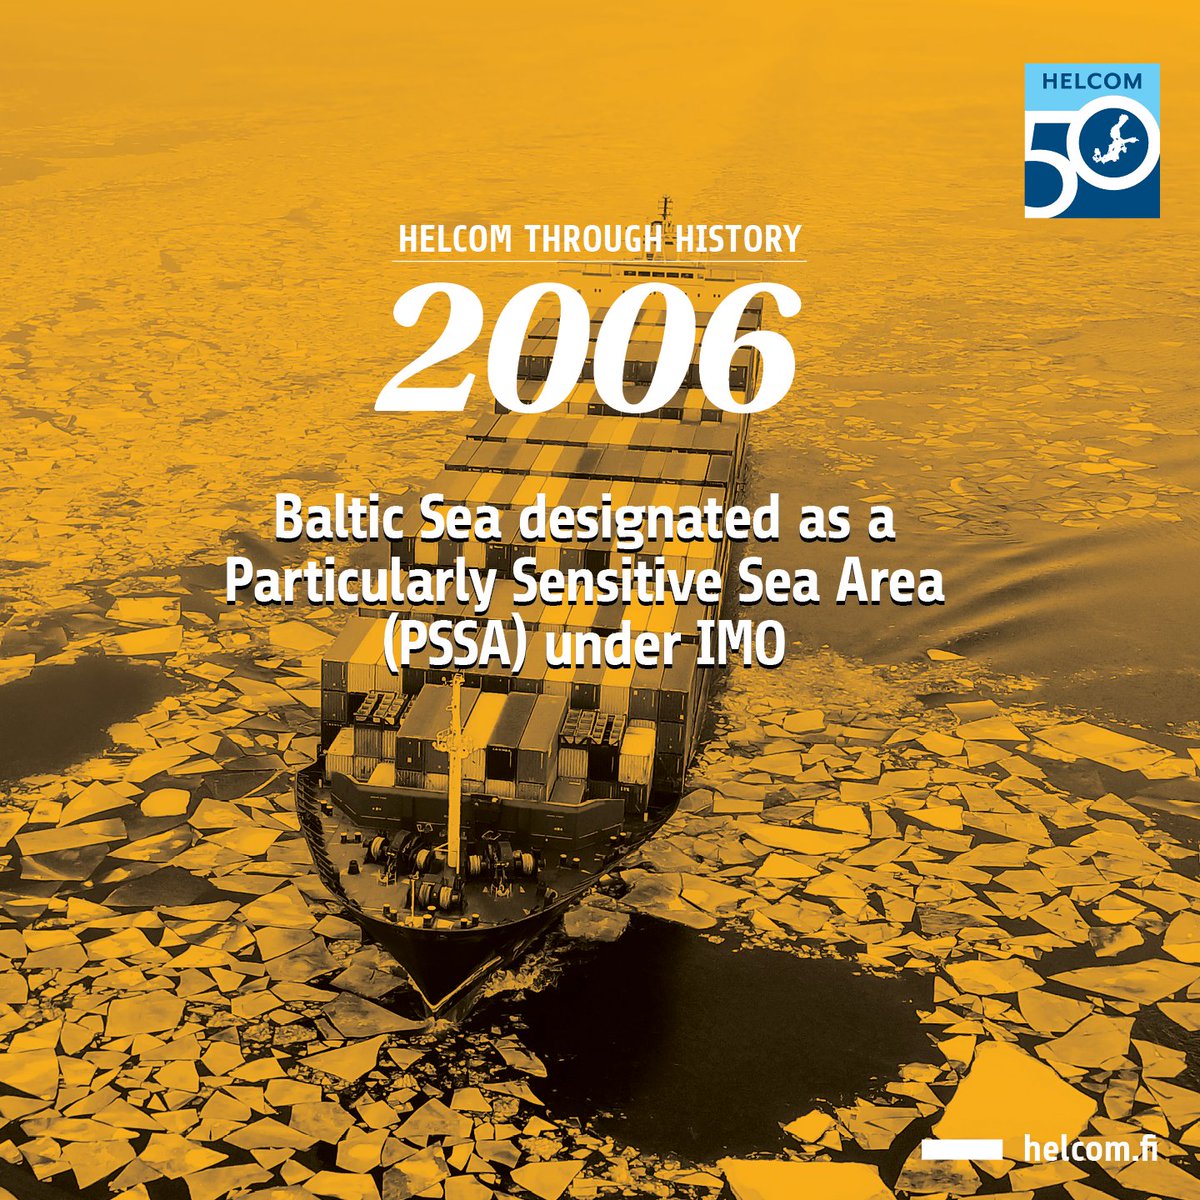 🕰️It’s HELCOM Through History time! 🕰️ The Baltic Sea, identified by the International Maritime Organization (IMO) as a Particularly Sensitive Sea Area (PSSA), highlights need for special protection due to vulnerability to maritime environmental damage. #HELCOMThroughHistory